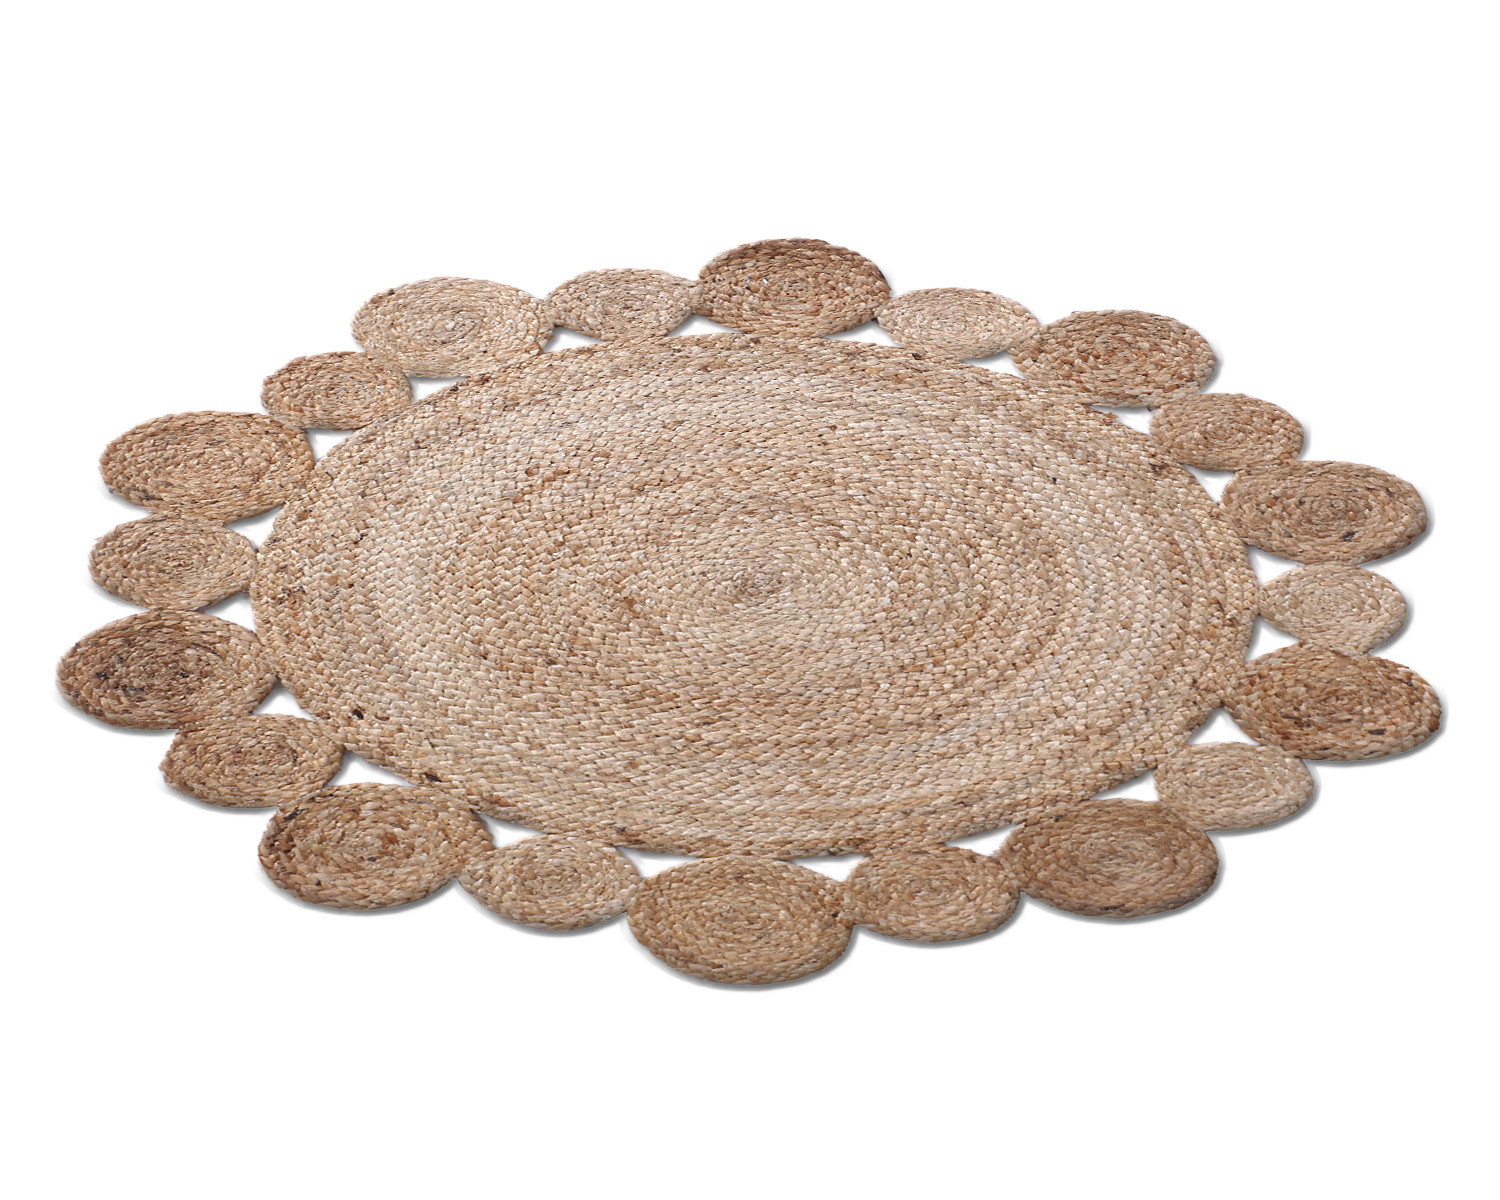 Kuber Industries Hand Woven Carpet Rugs|Natural Braided Jute Door mat|Multi Round Circle Mat For Bedroom,Living Room,Dining Room,Yoga,92x92 cm,(Brown)